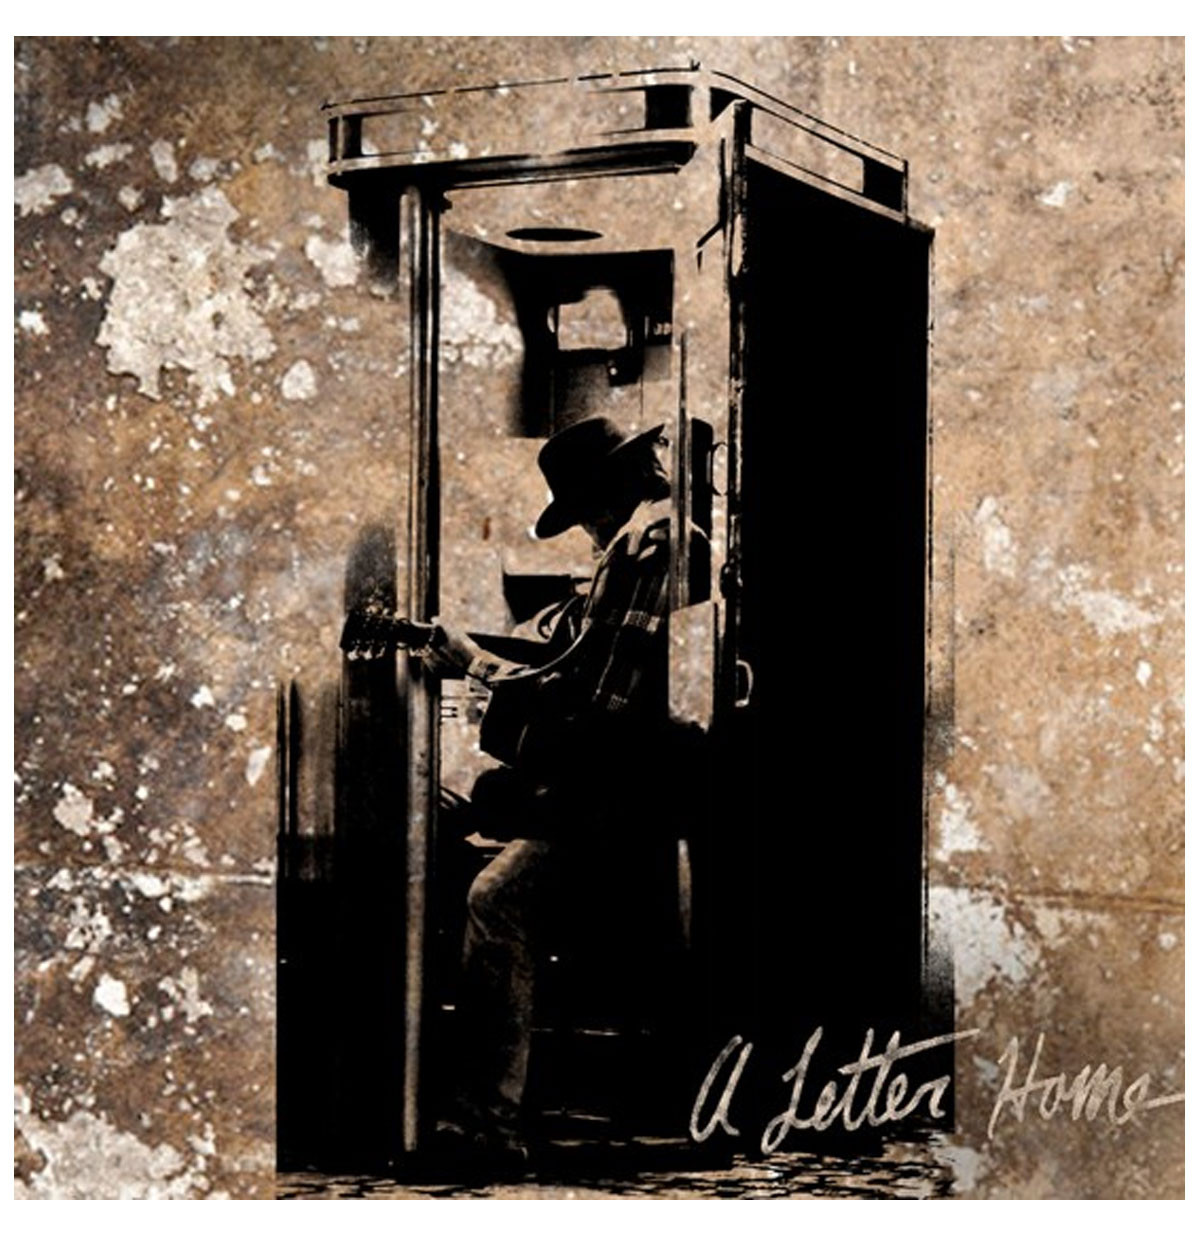 Neil Young - A Letter Home LP